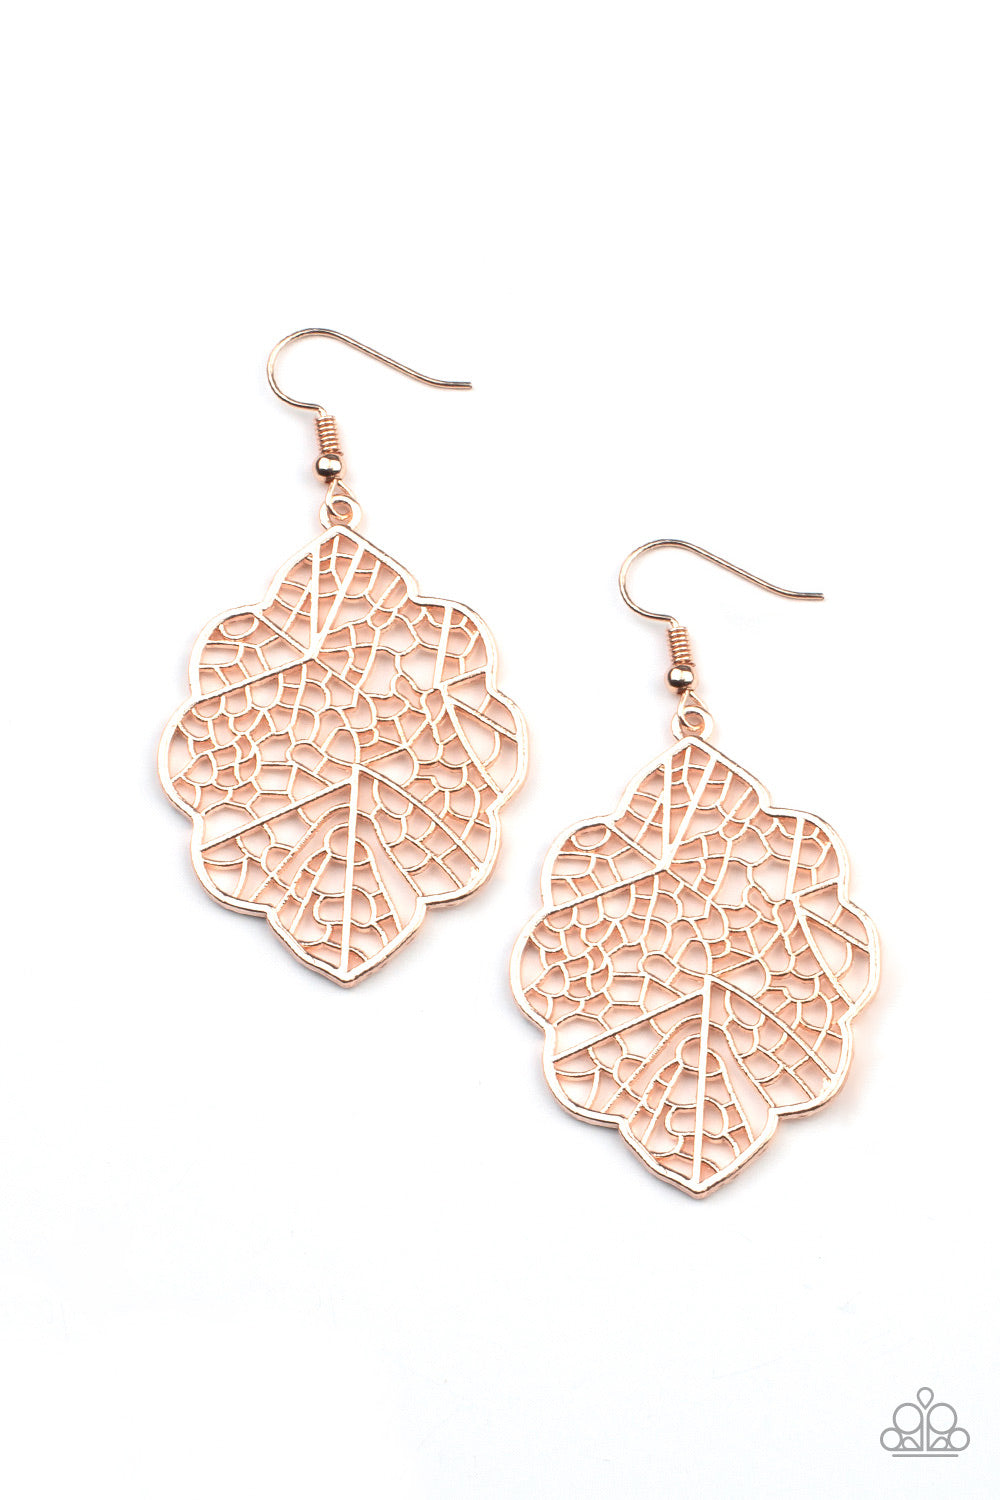 Paparazzi Accessories Meadow Mosaic - Rose Gold Earrings - Lady T Accessories